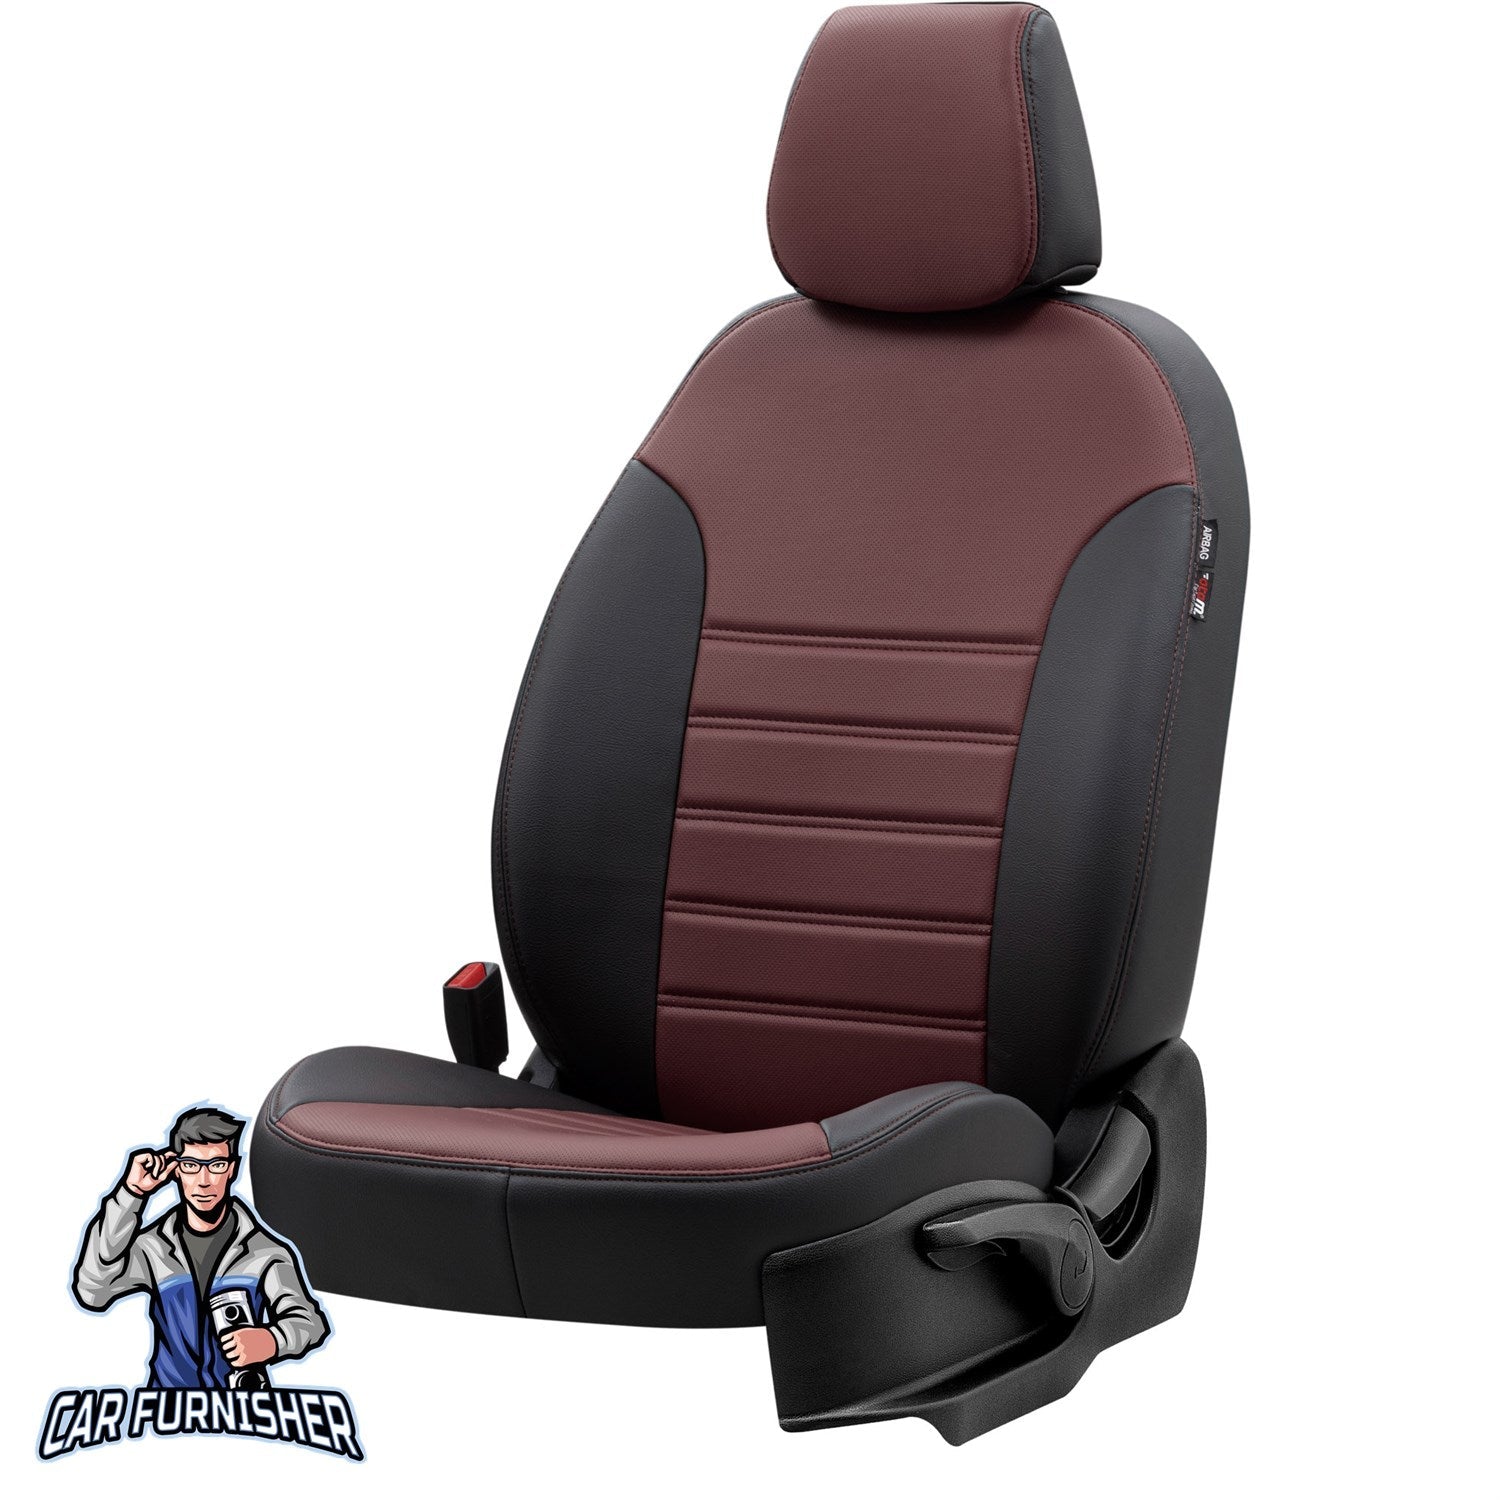 Volkswagen Jetta Seat Cover Istanbul Leather Design Burgundy Leather